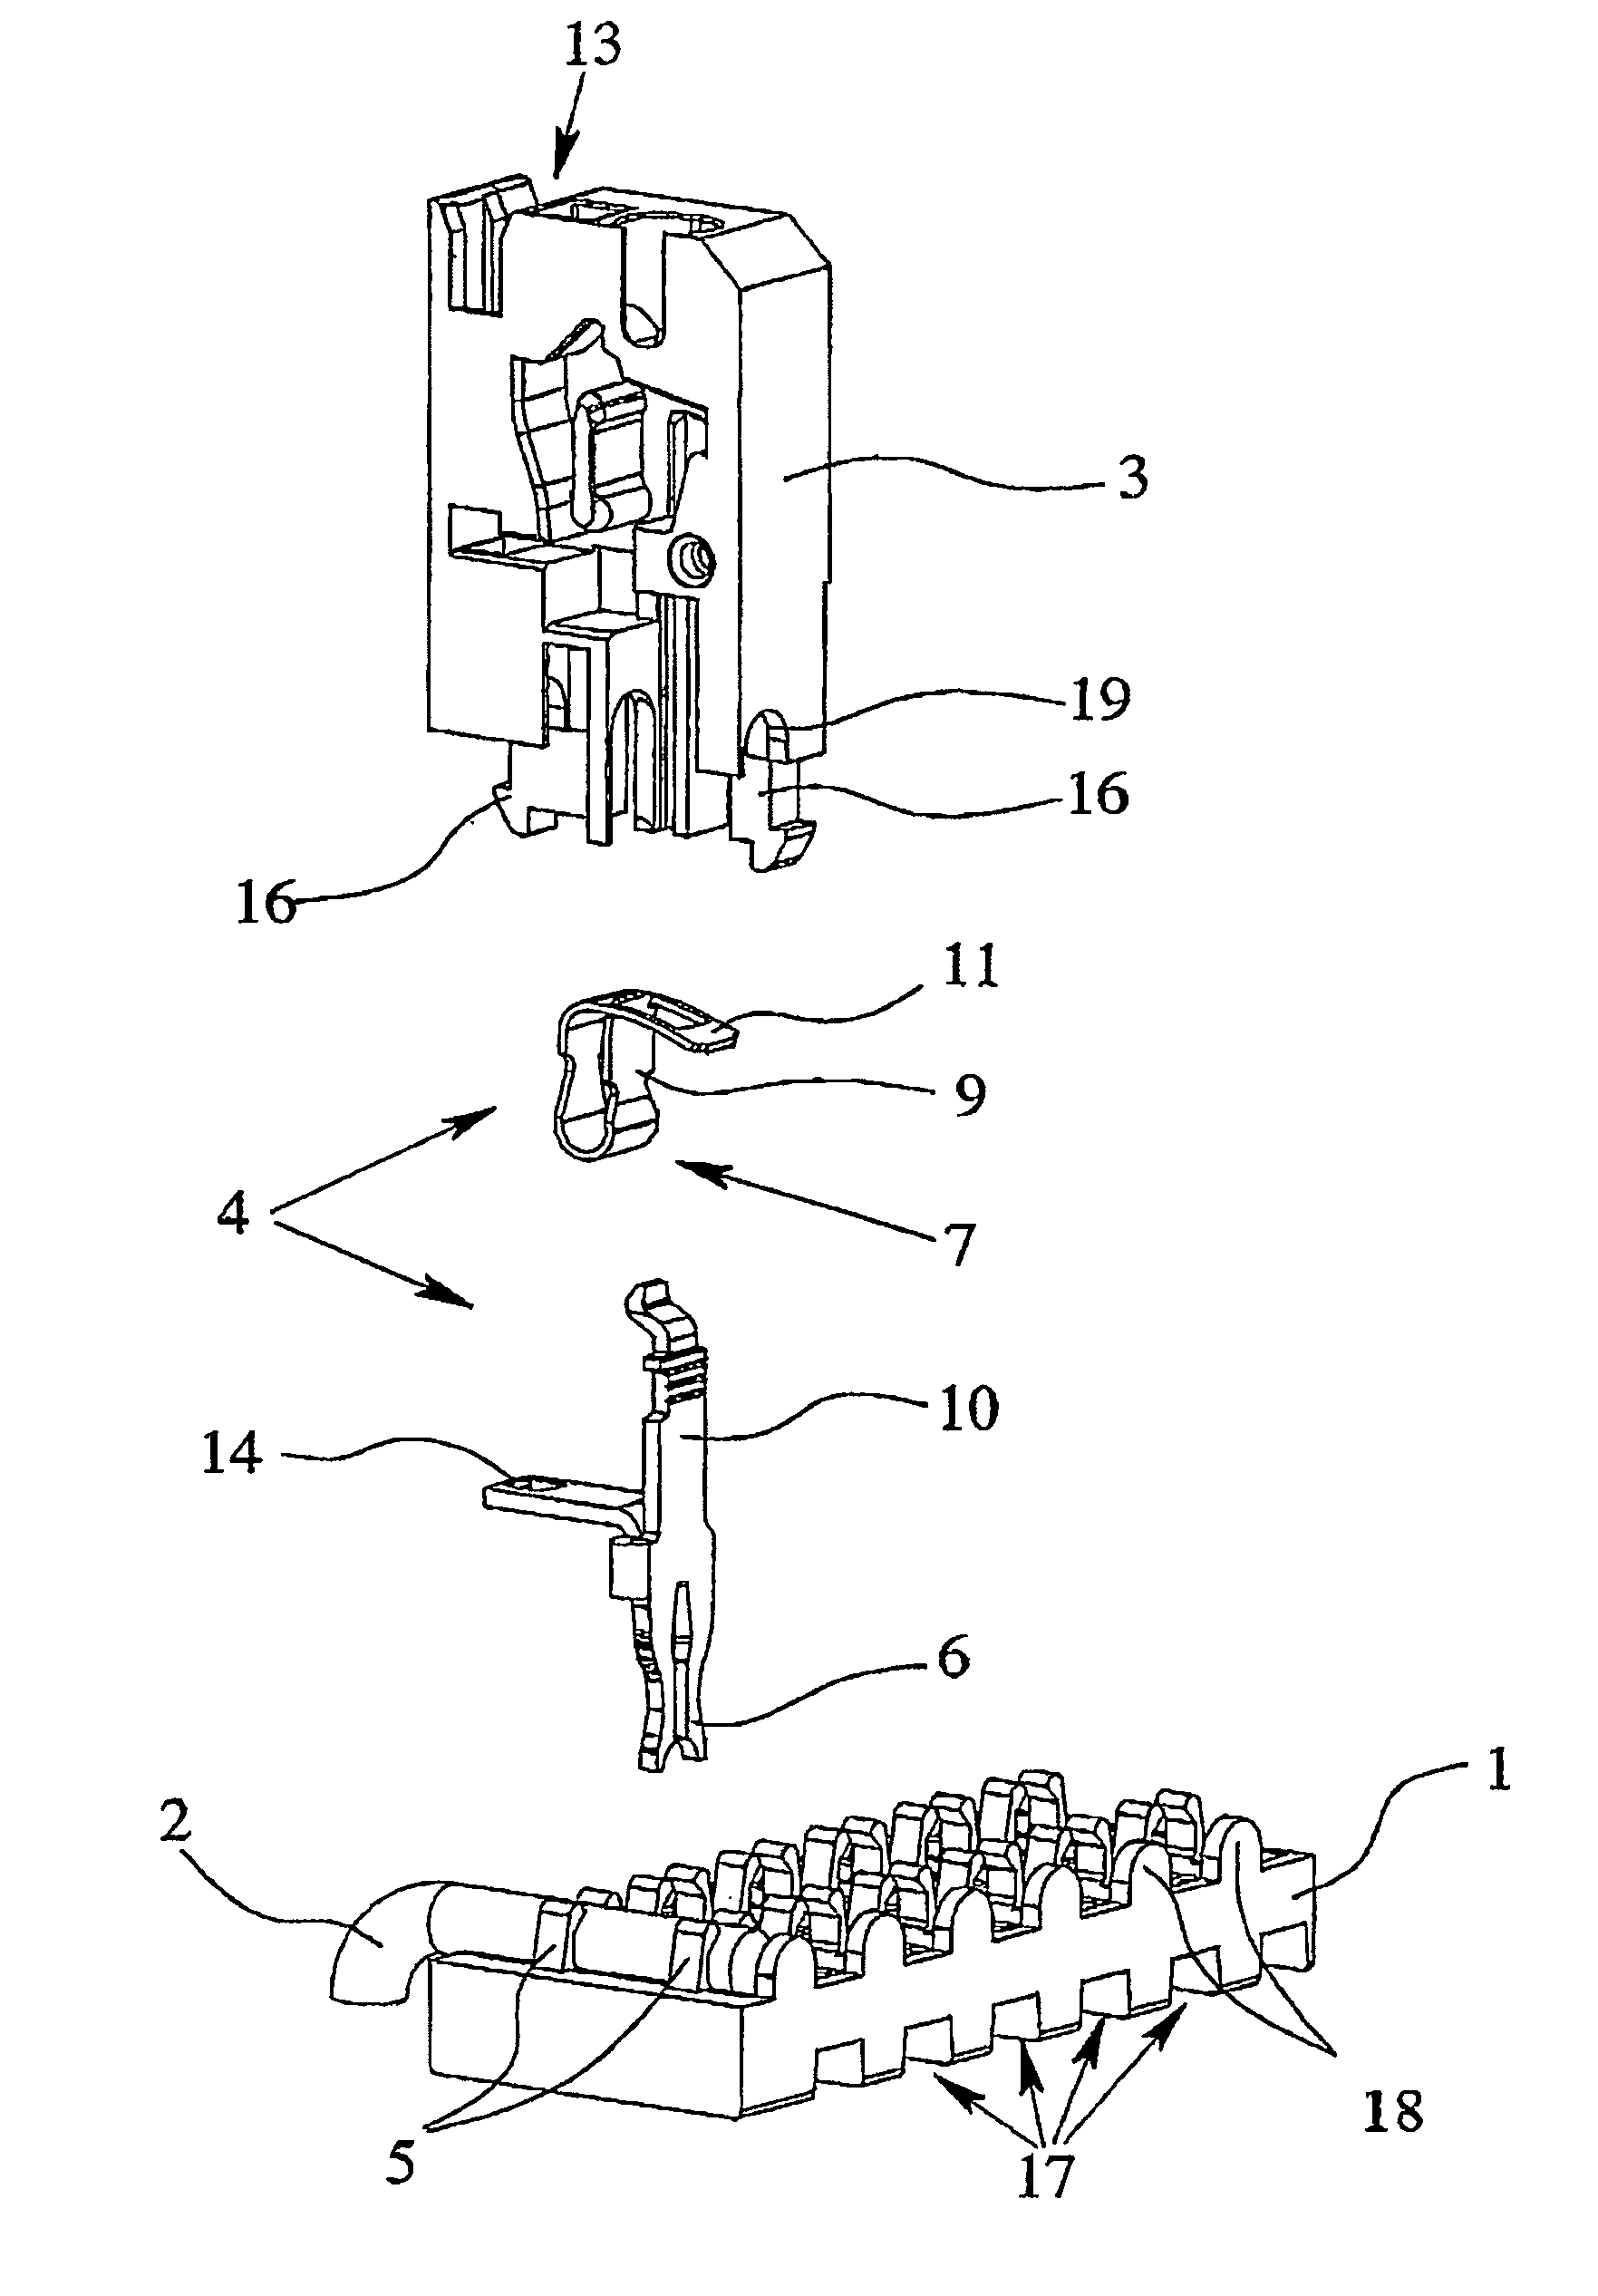 Electrical connection arrangement with simplified fastening device for electrical connection of an electrical device